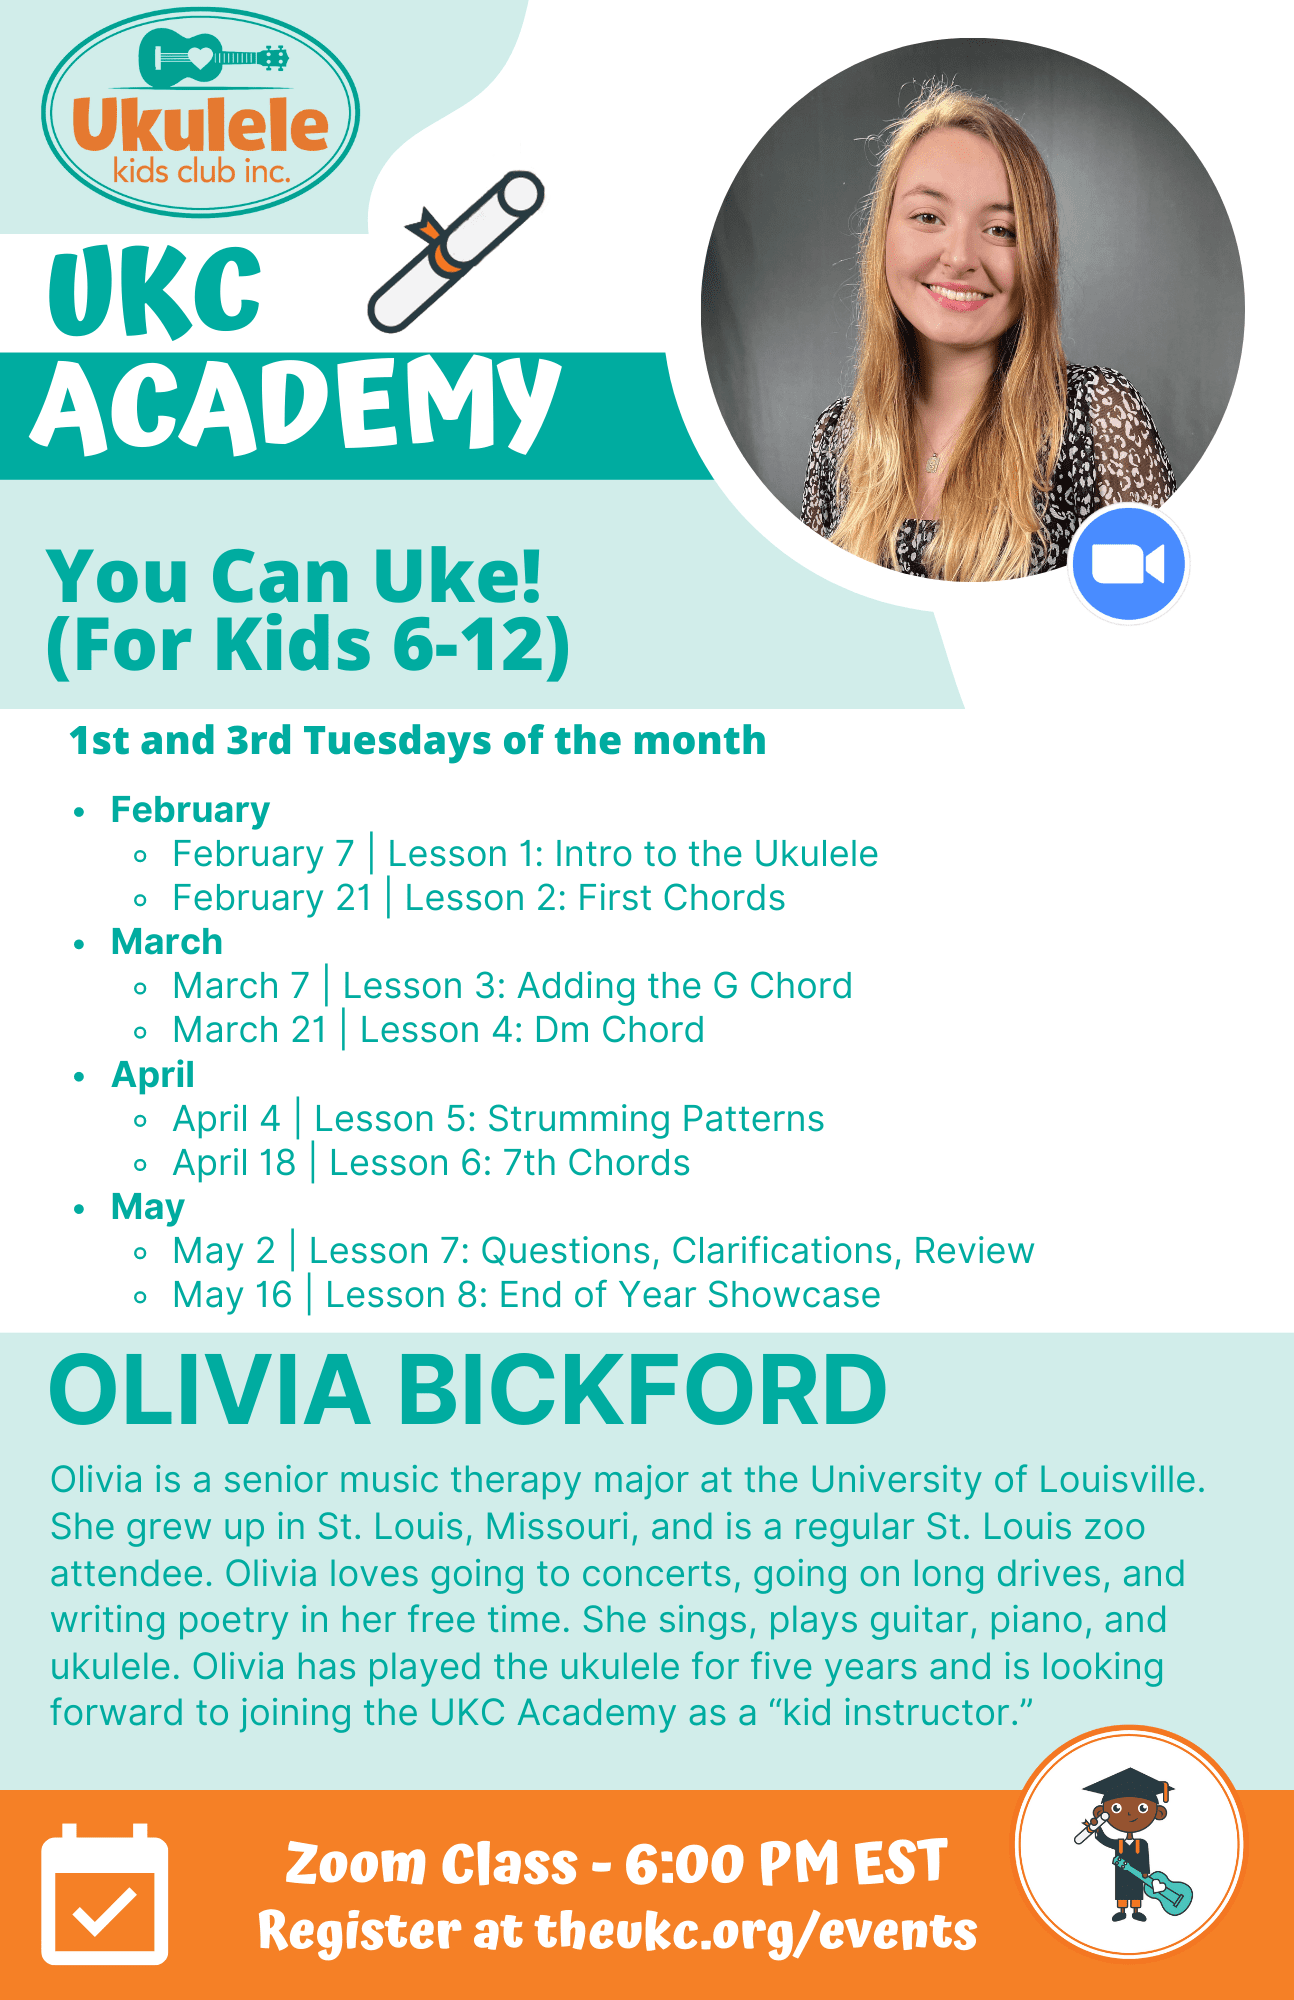 The event flyer includes a photo of Olivia Bickford, event dates, and a brief bio